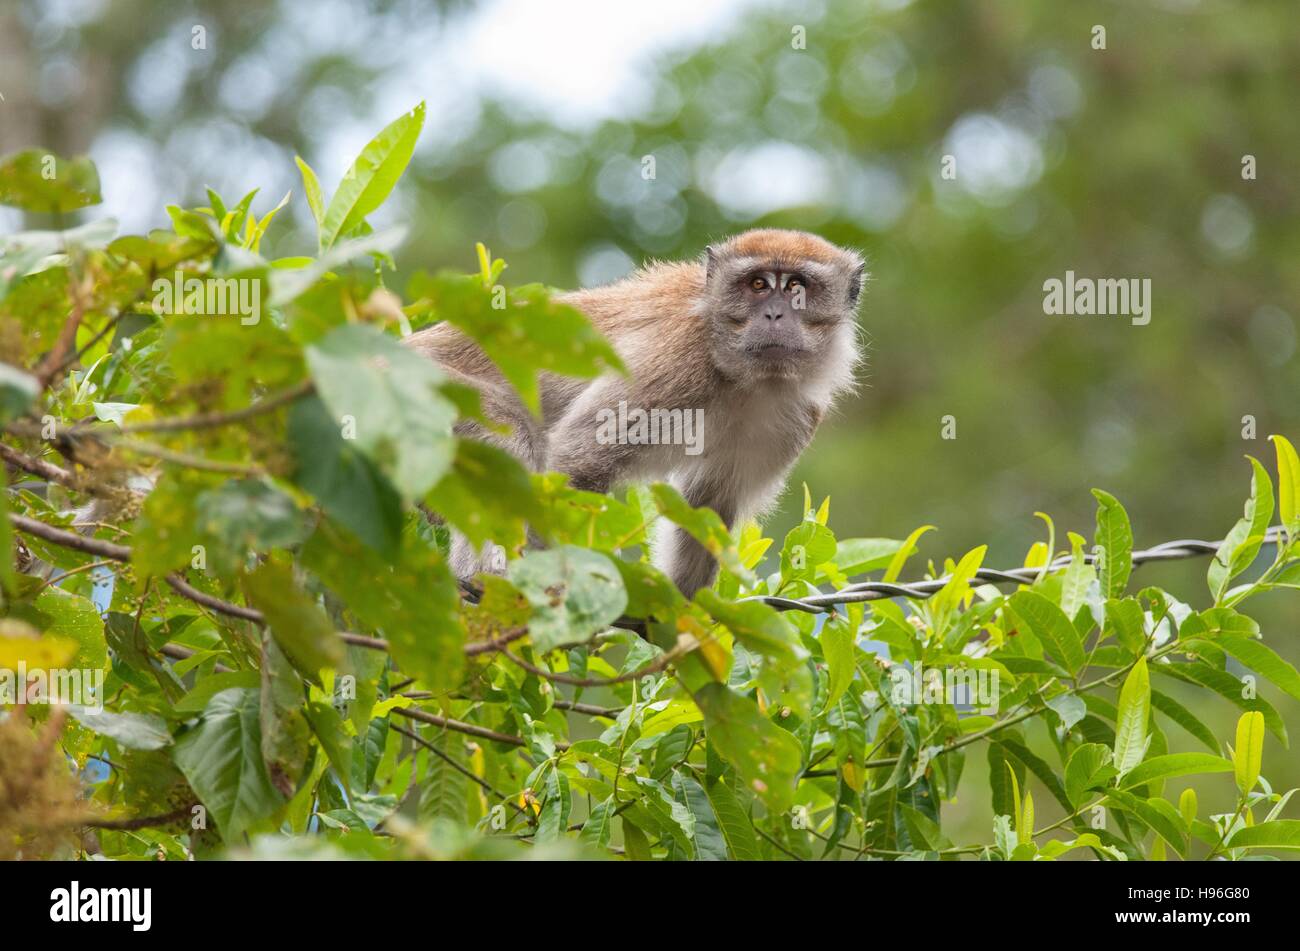 A single long-tailed (crab-eating) macaque - Macaca fascicularis - watching from trees at the roadside in the hills of Malaysia Stock Photo